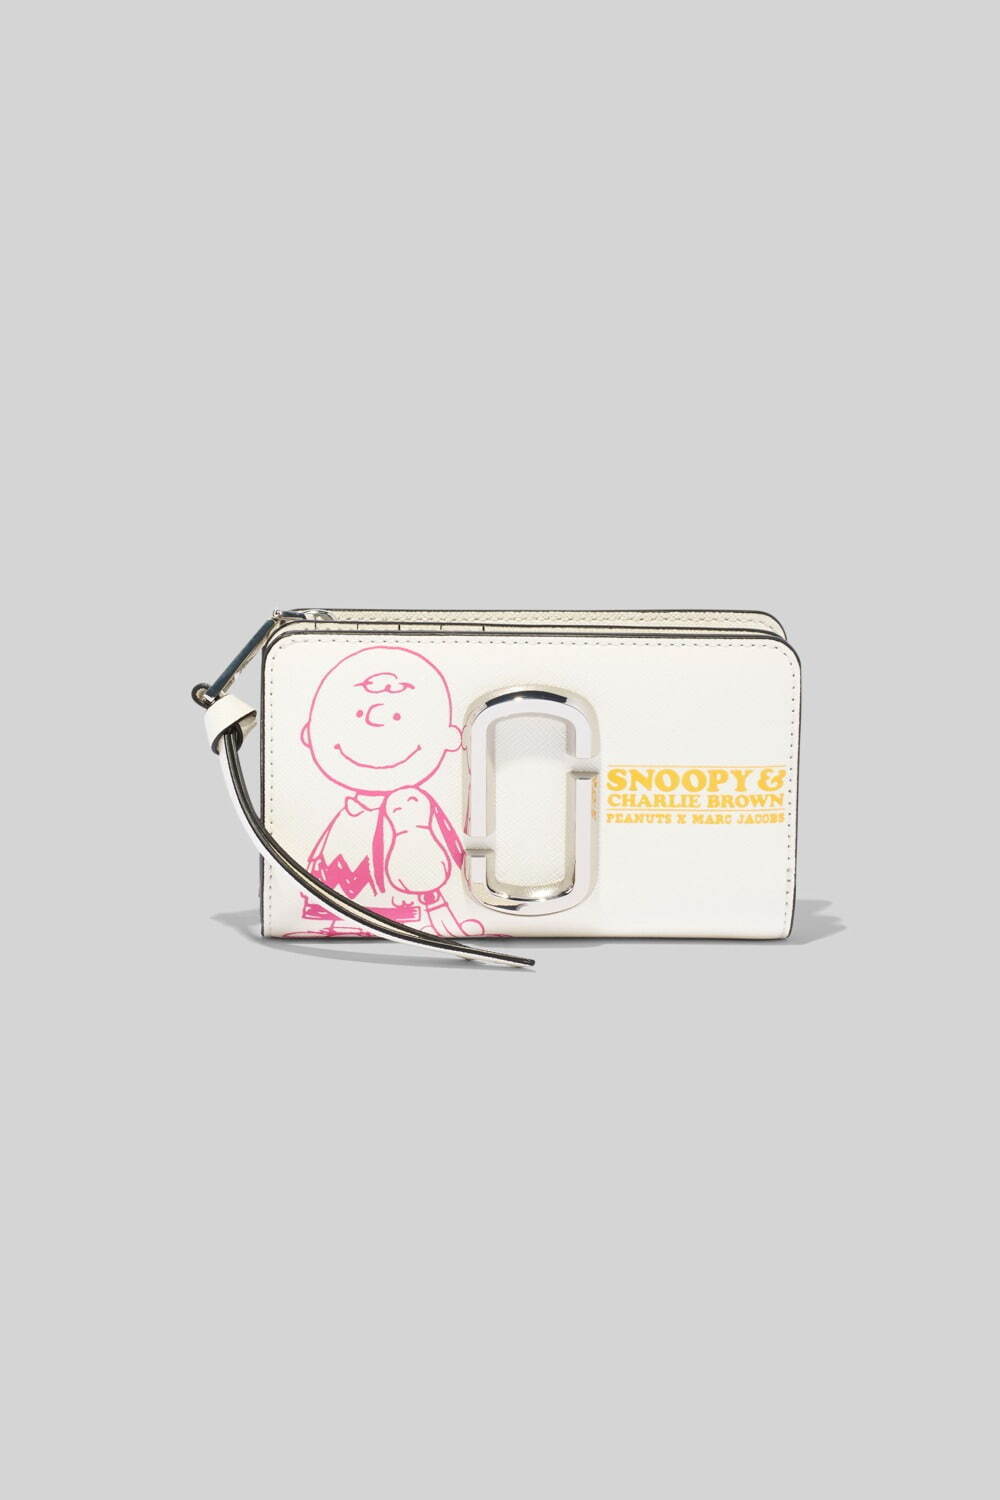 「PEANUTS X MARC JACOBS THE SNAPSHOT SNOOPY COMPACT WALLET」34,100円